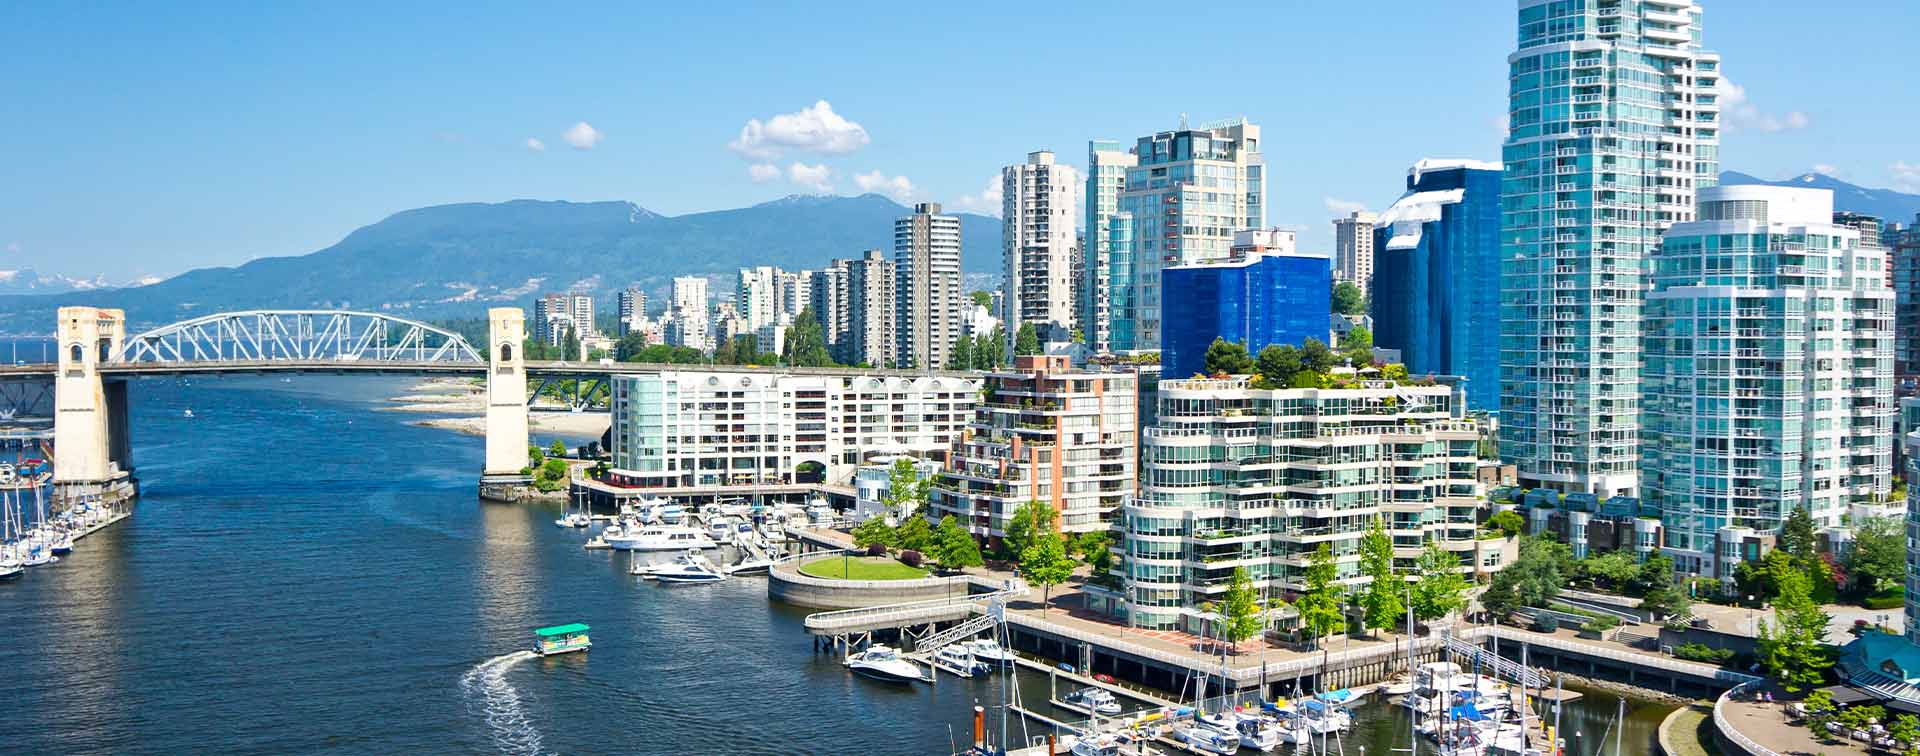 View of Vancouver, Canada, with boats in a harbor and buildings behind it